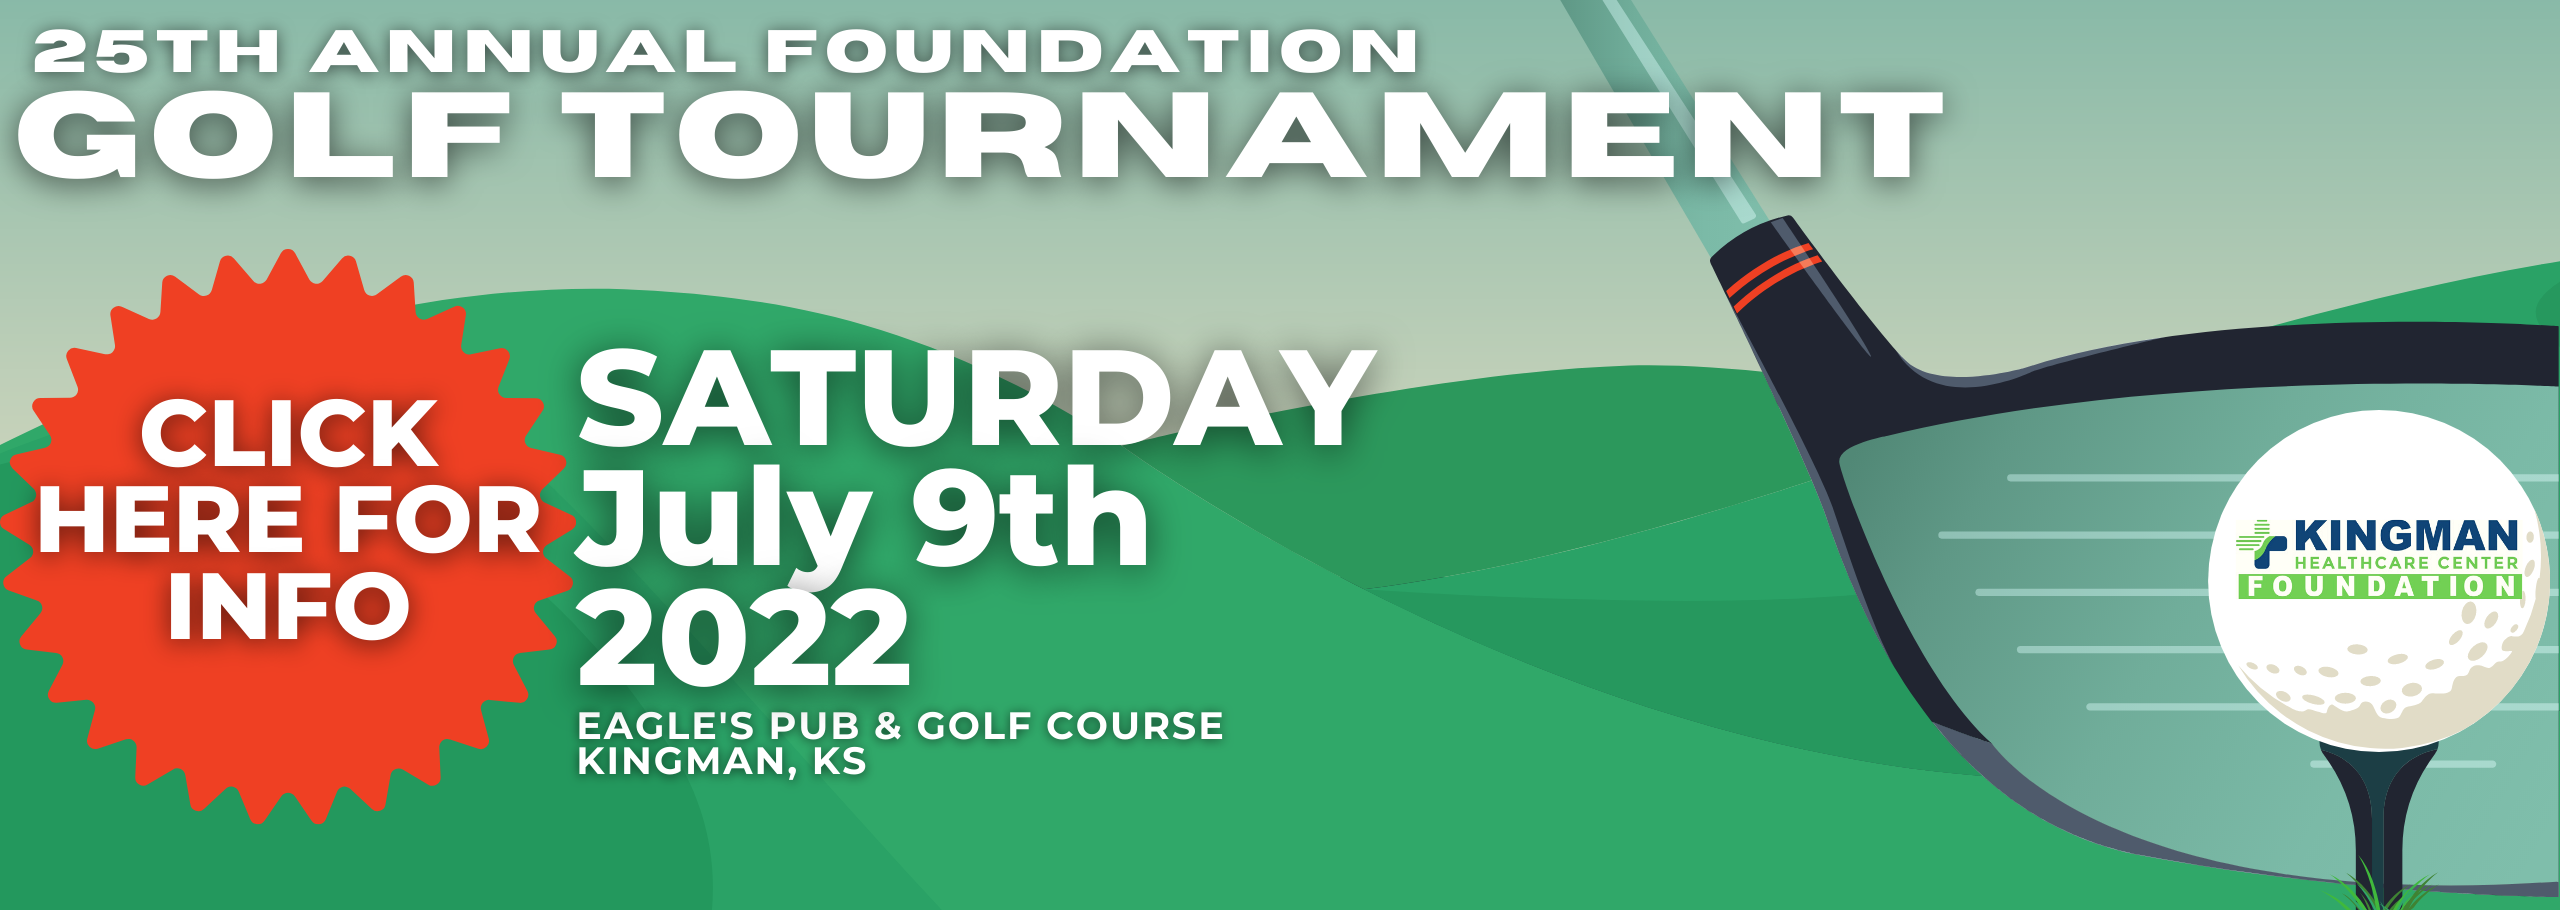 Banner graphic picture of a golf ball on a T that says KINGMAN HEALTHCARE FOUNDATION on it and a golf club  Banner says:

25th ANNUAL FOUNDATION
GOLF TOURNAMENT 

SATURDAY
July 9th, 2022
Eagles Pub & Golf Course
KINGMAN, KS